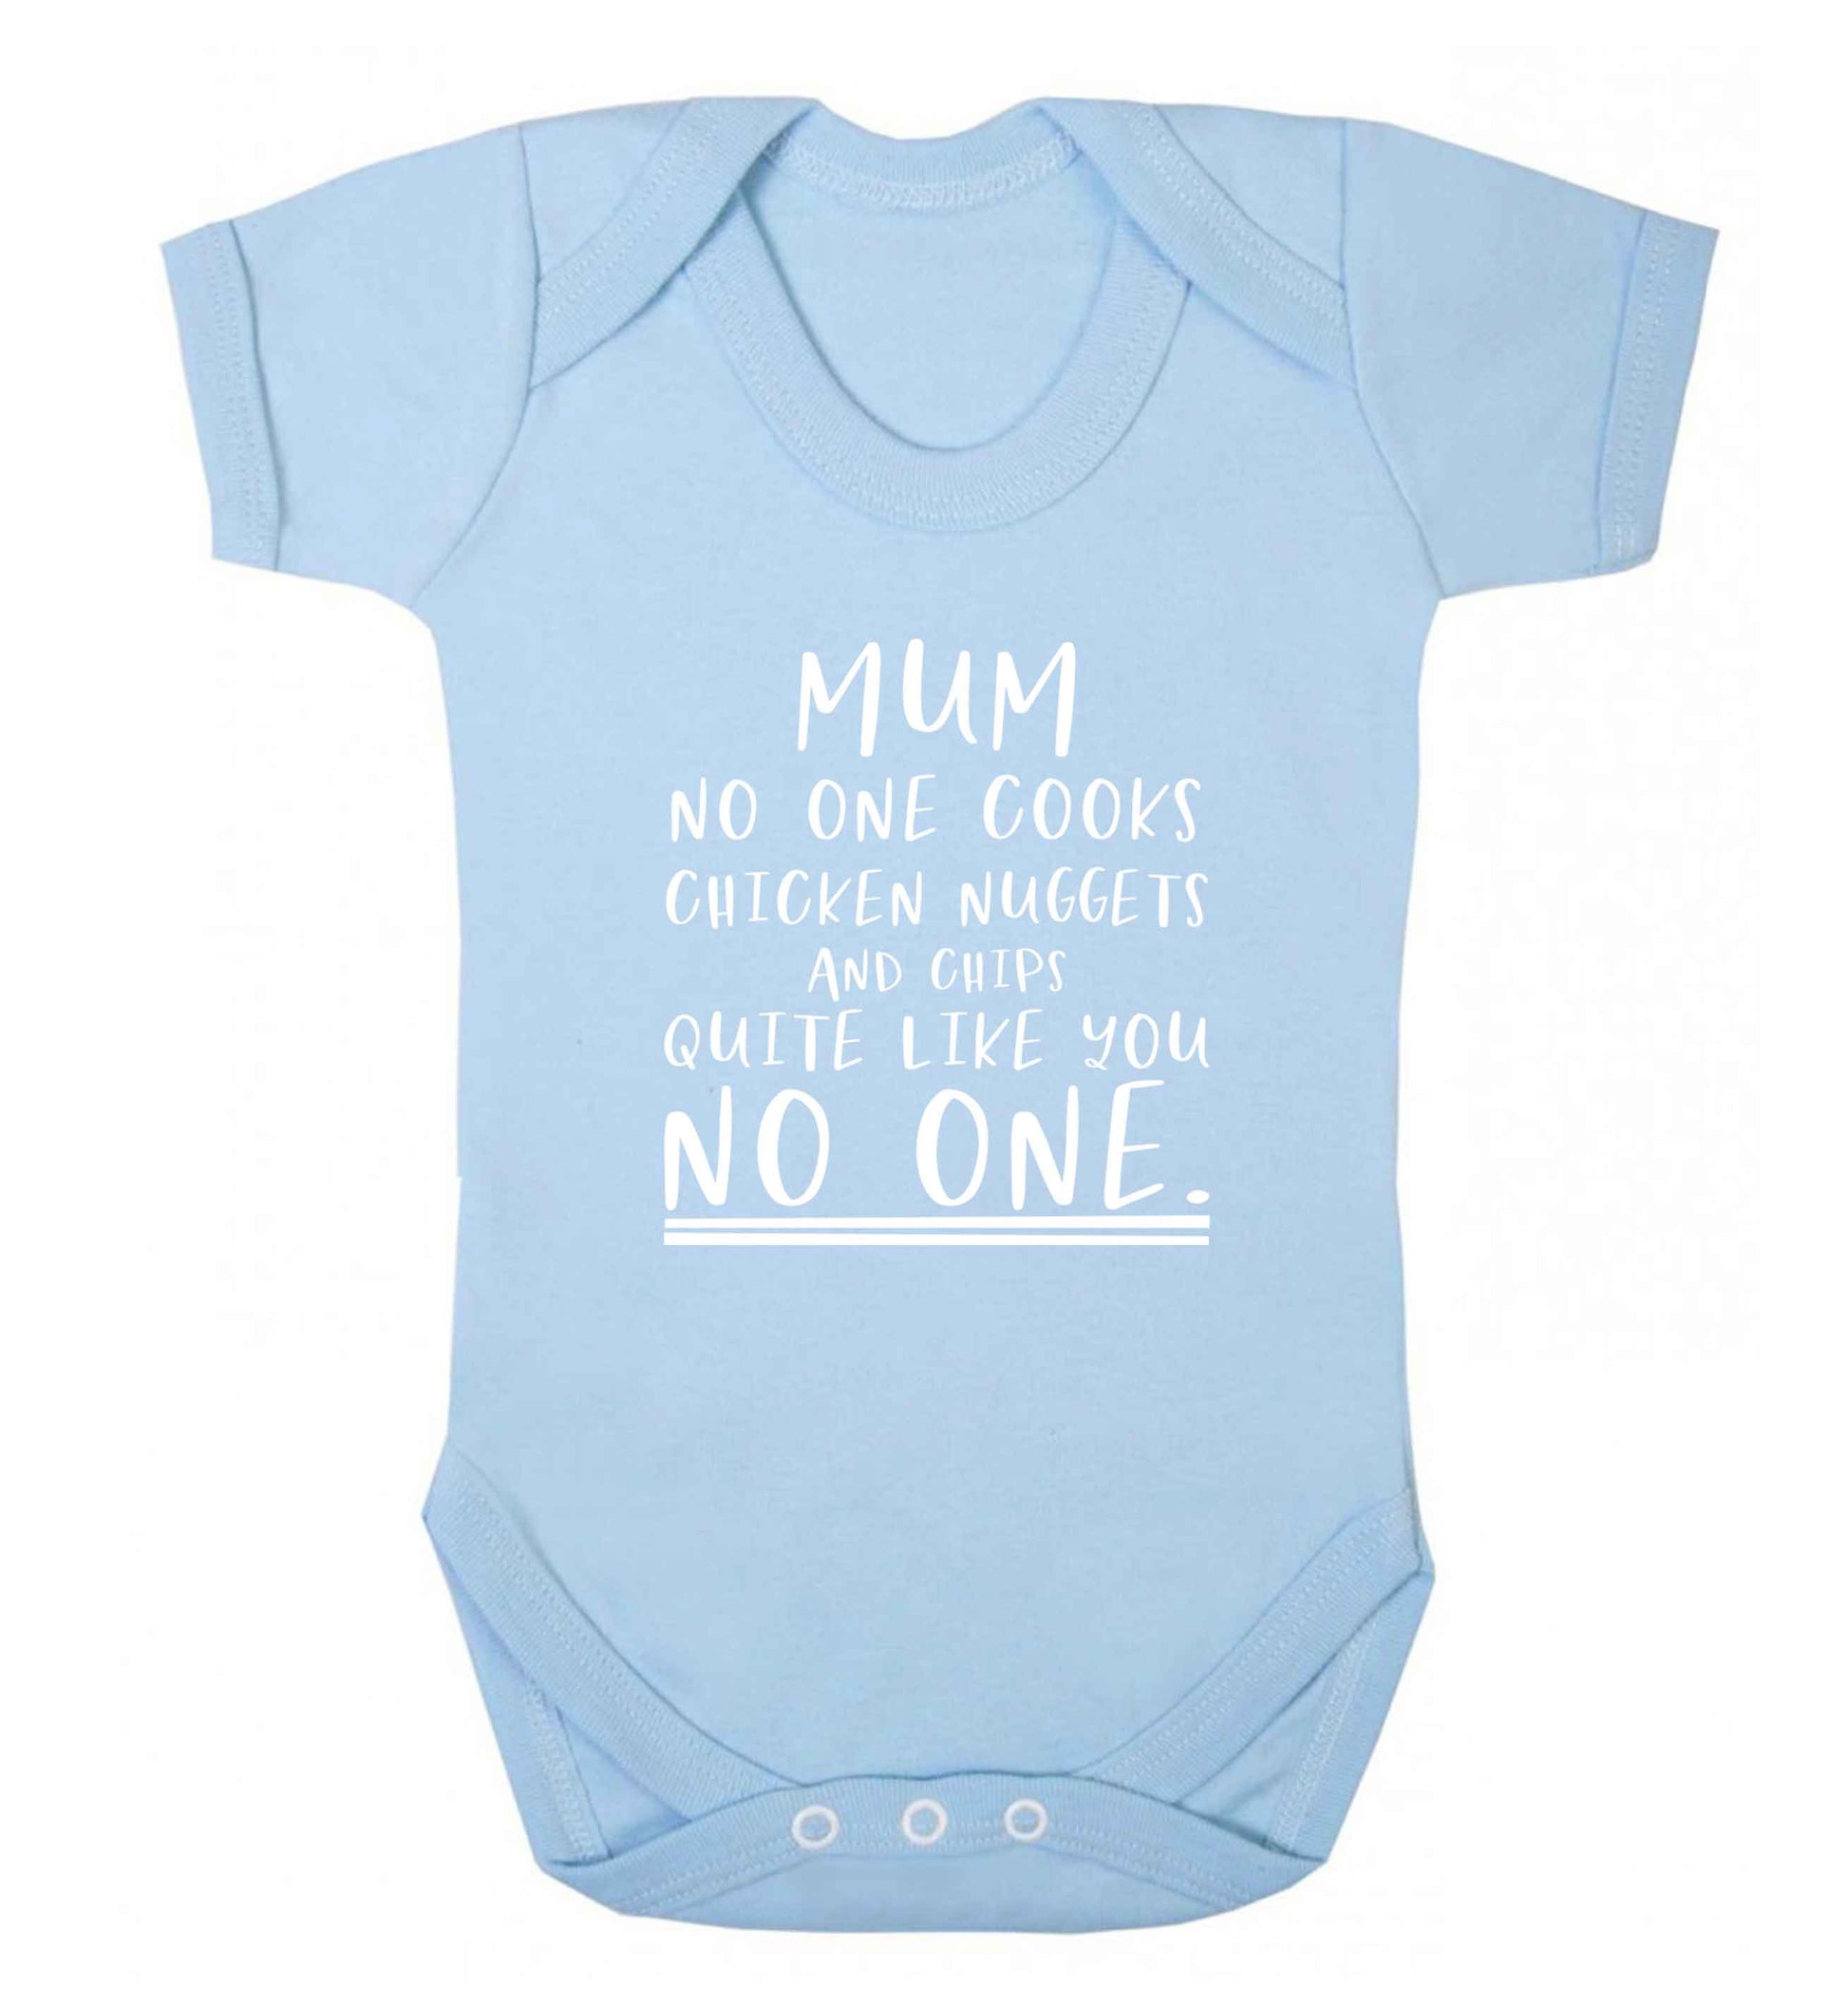 Super funny sassy gift for mother's day or birthday!  Mum no one cooks chicken nuggets and chips like you no one baby vest pale blue 18-24 months